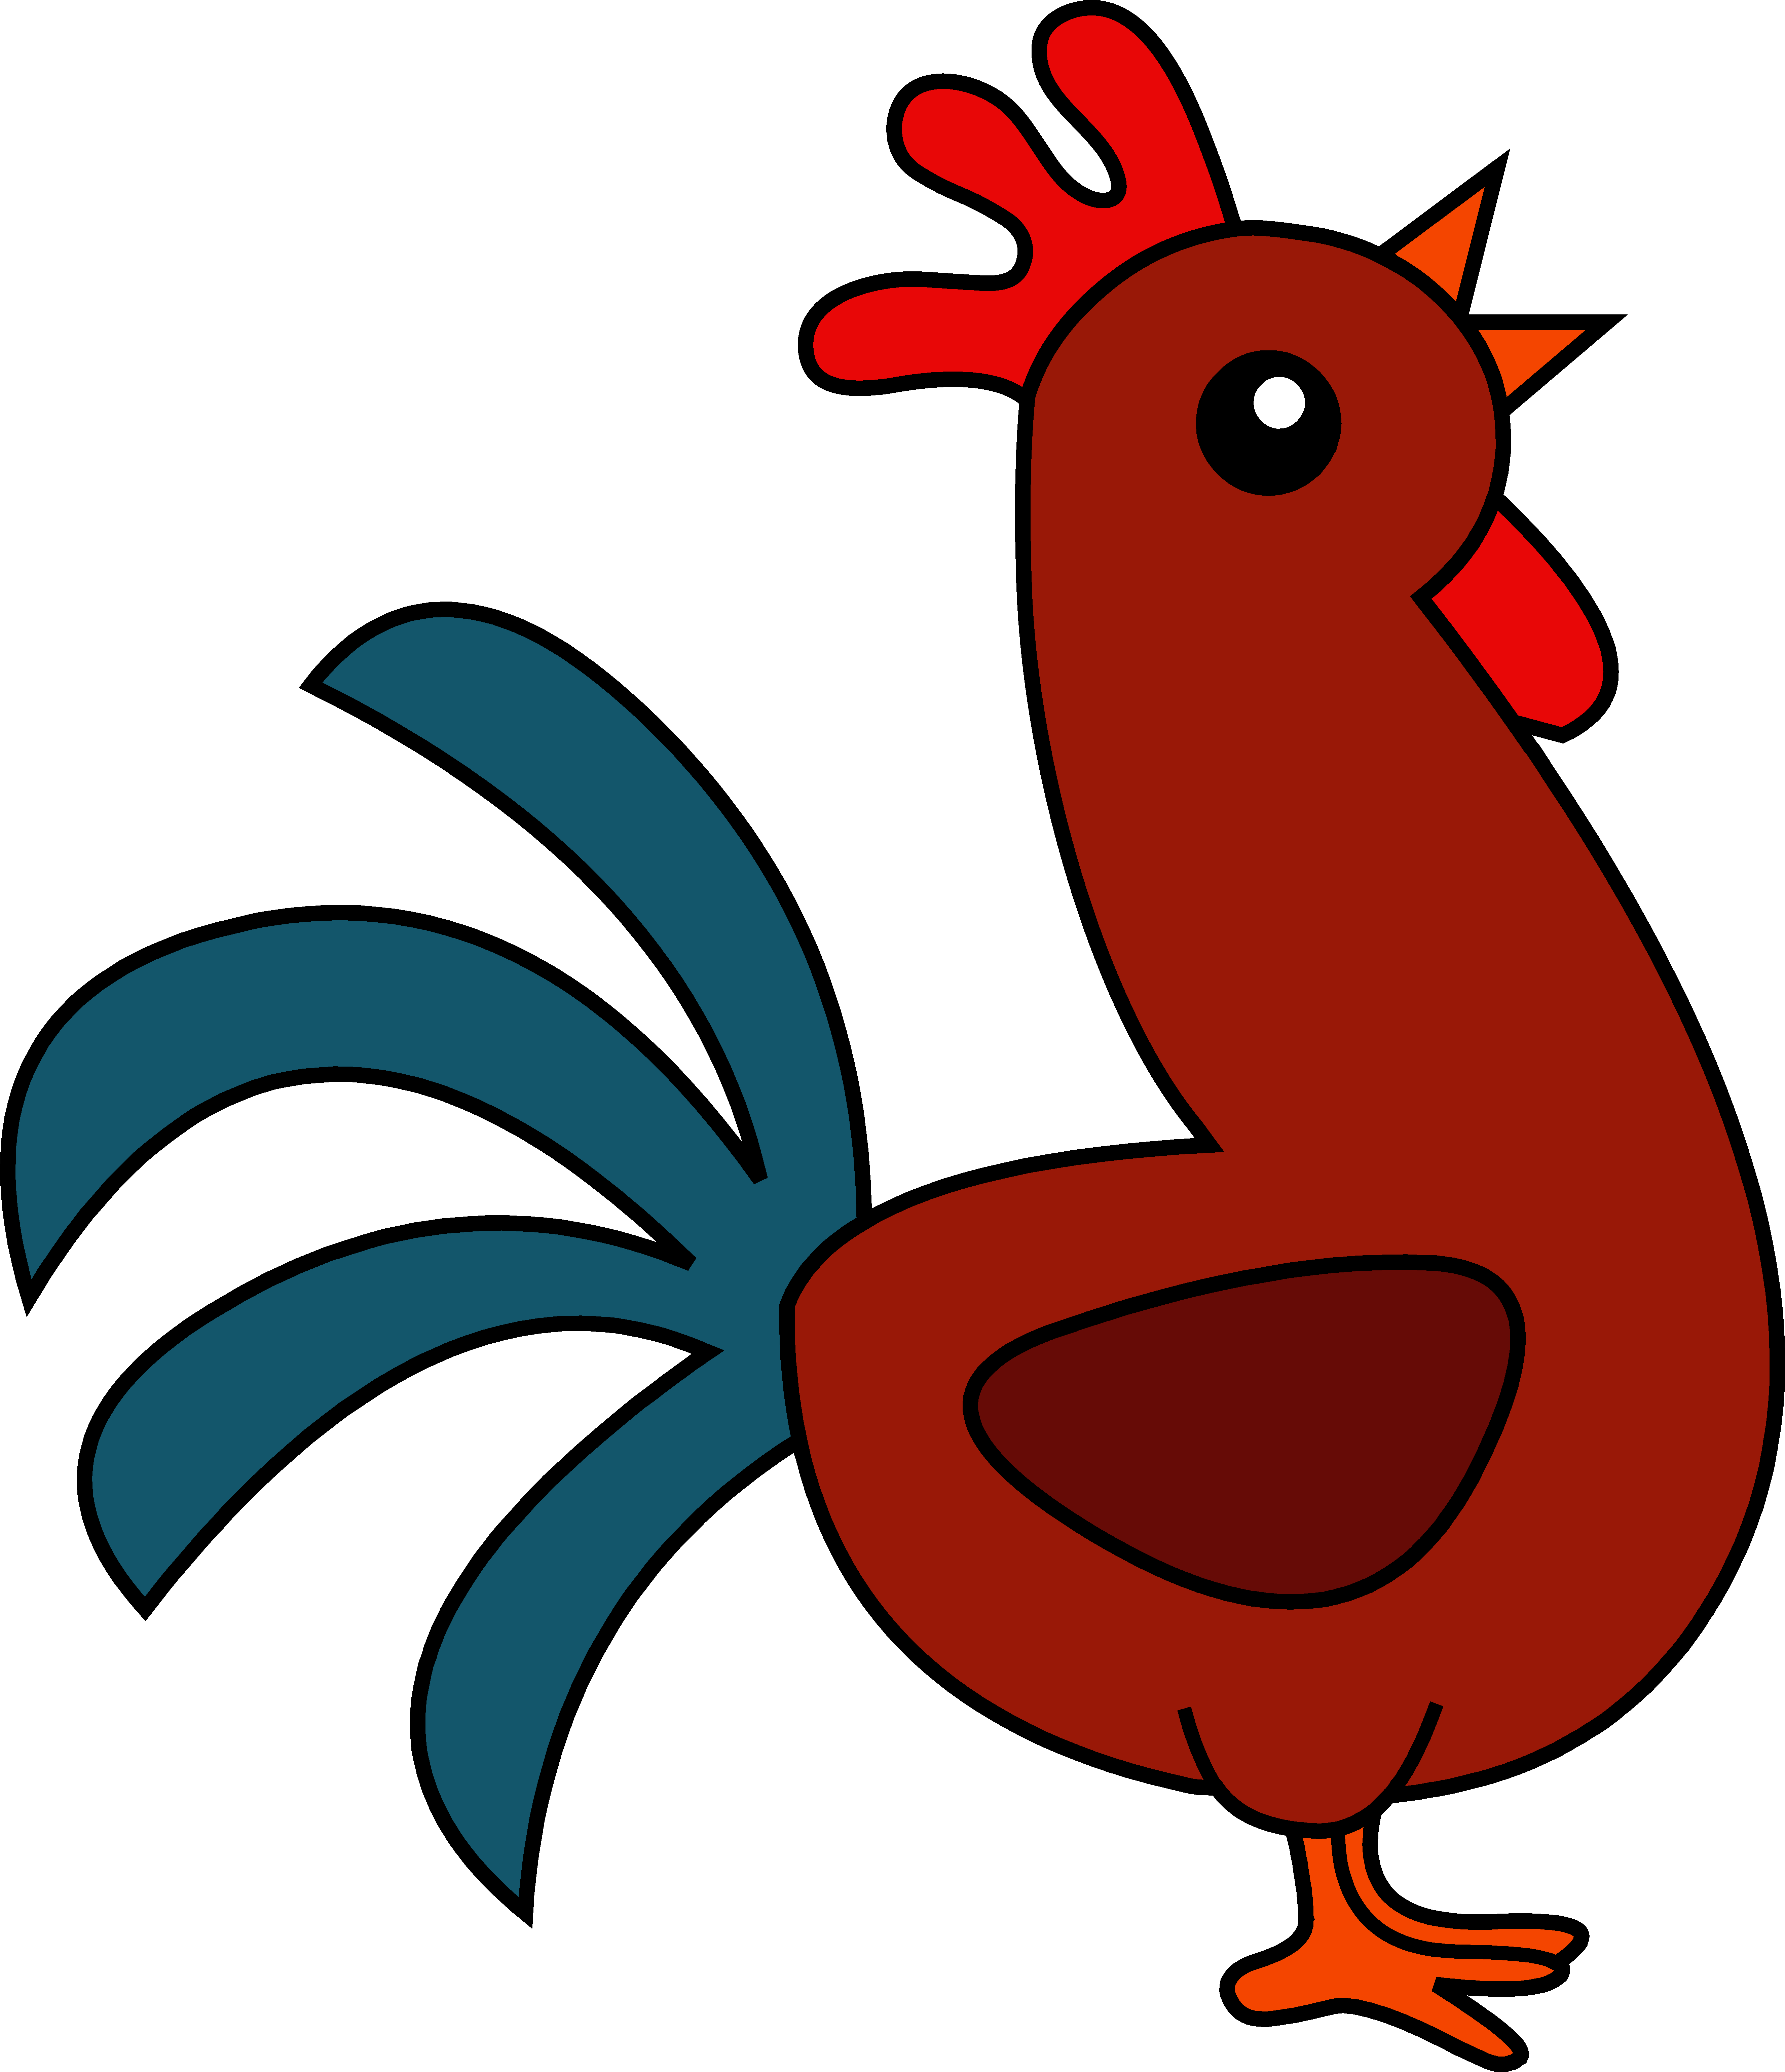 rooster clipart - photo #14